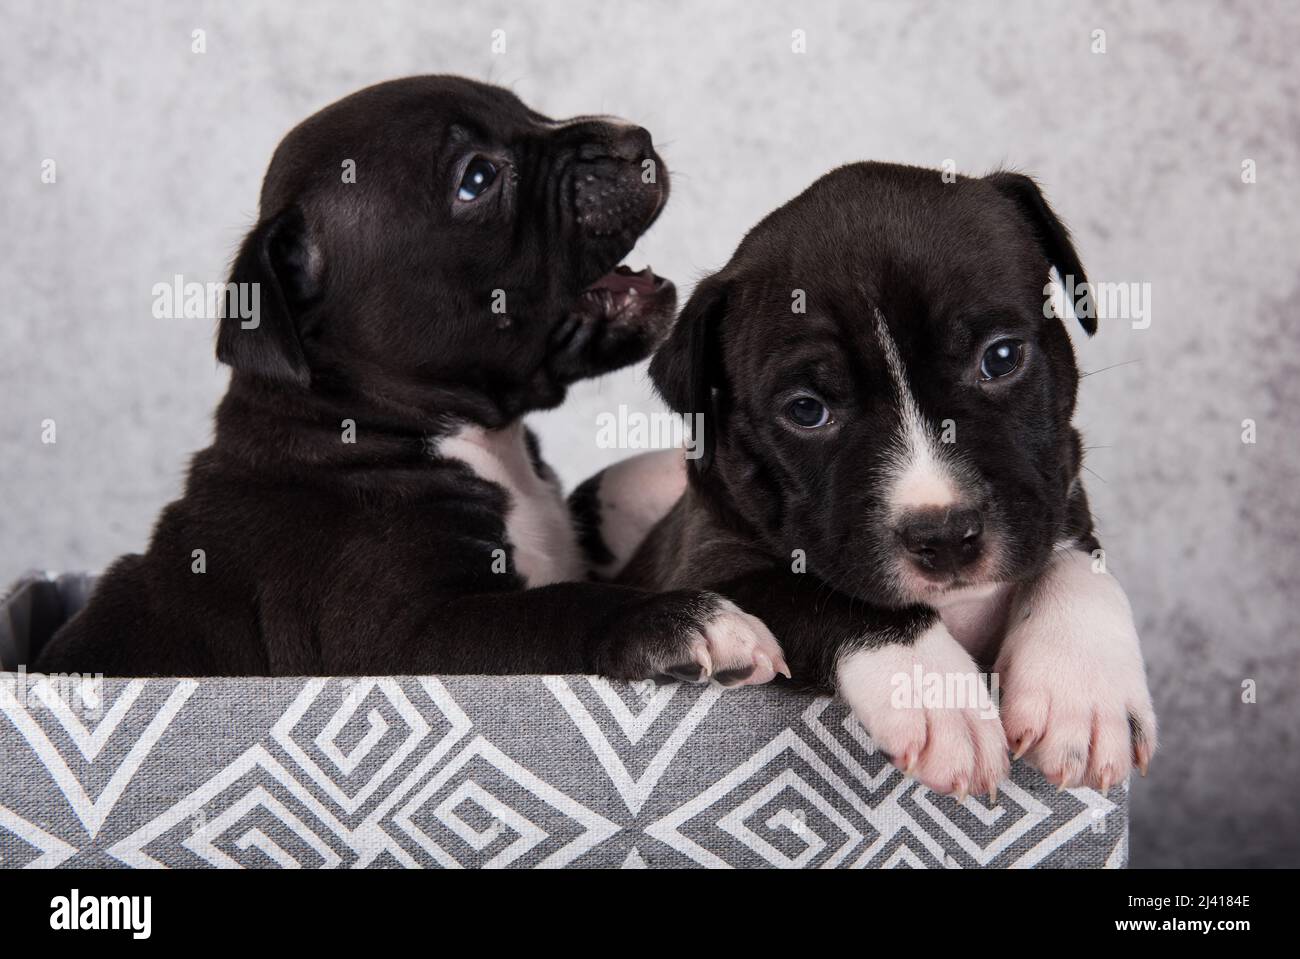 Black and white American Staffordshire Terrier dogs or AmStaff puppies Stock Photo